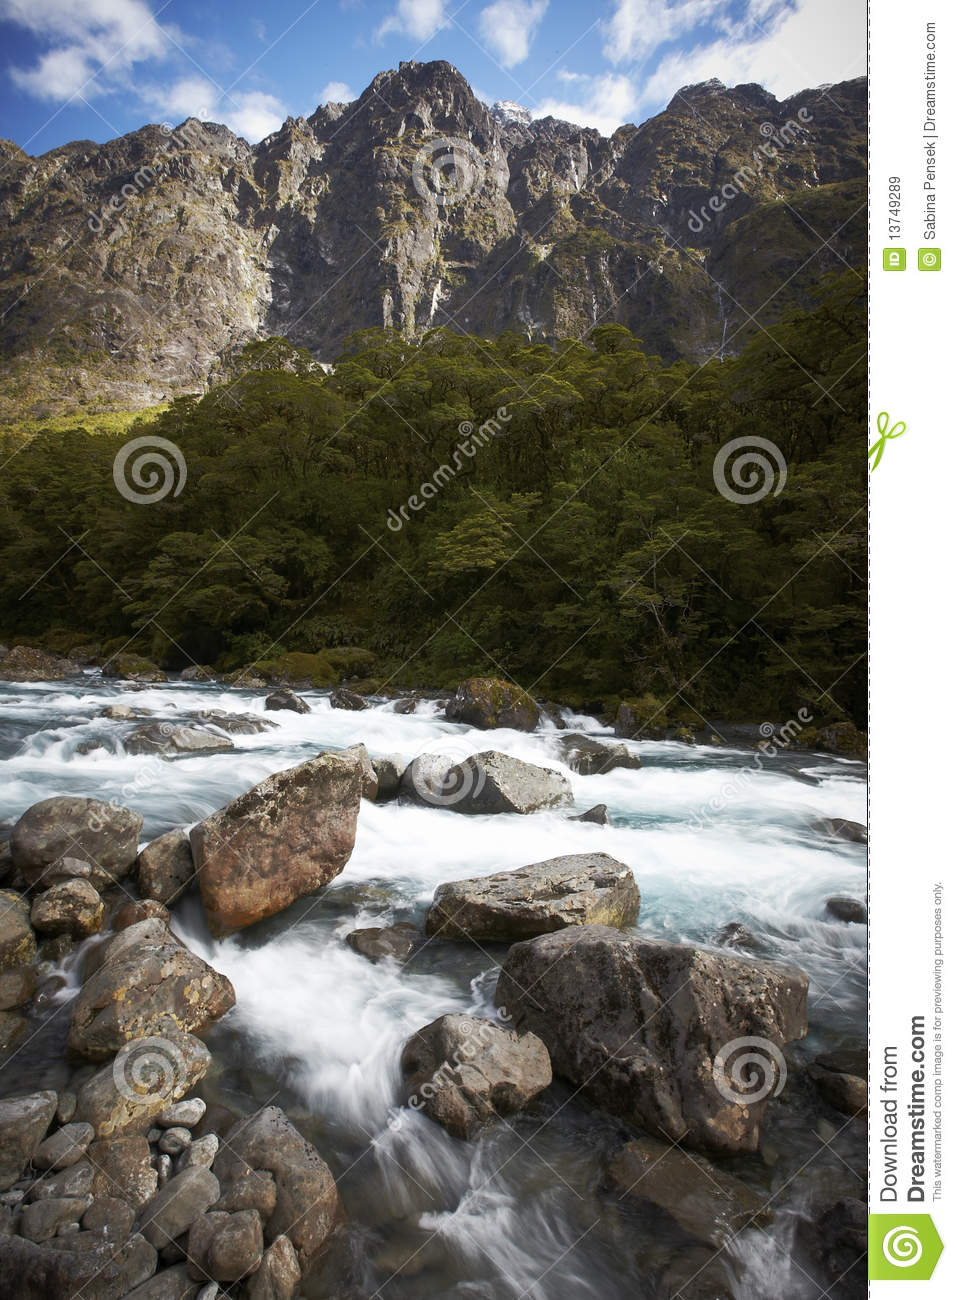 Mountain River Skipping Over The Rocks With Forest And Mountains In